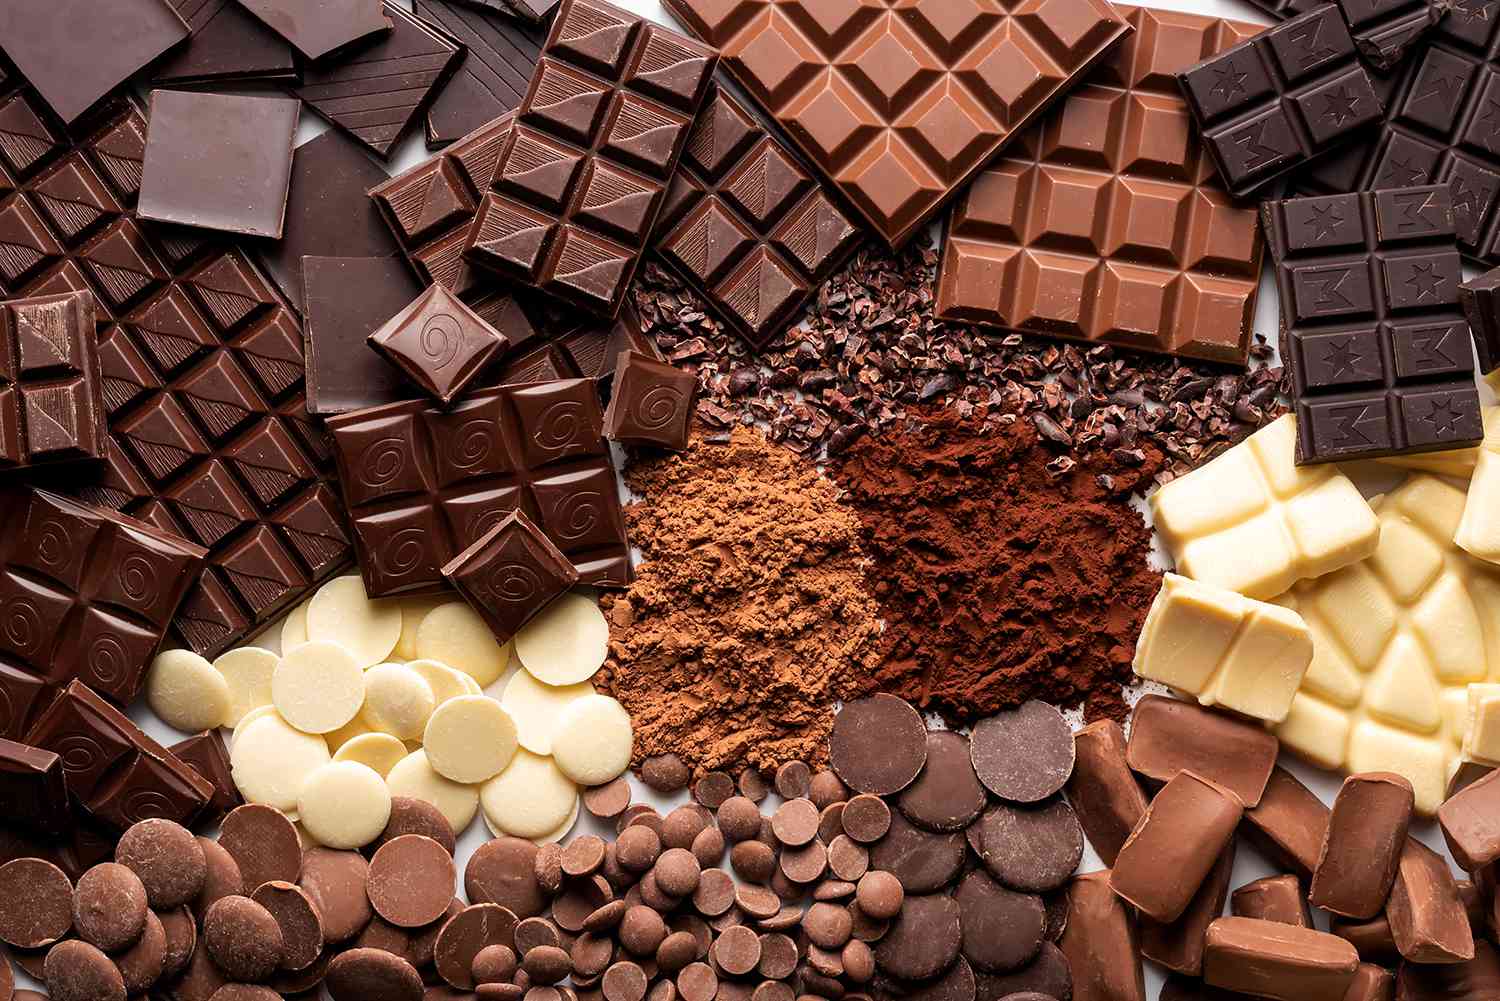 Chocolate-Making Ingredient Cocoa Hits Highest Price In 46 Years